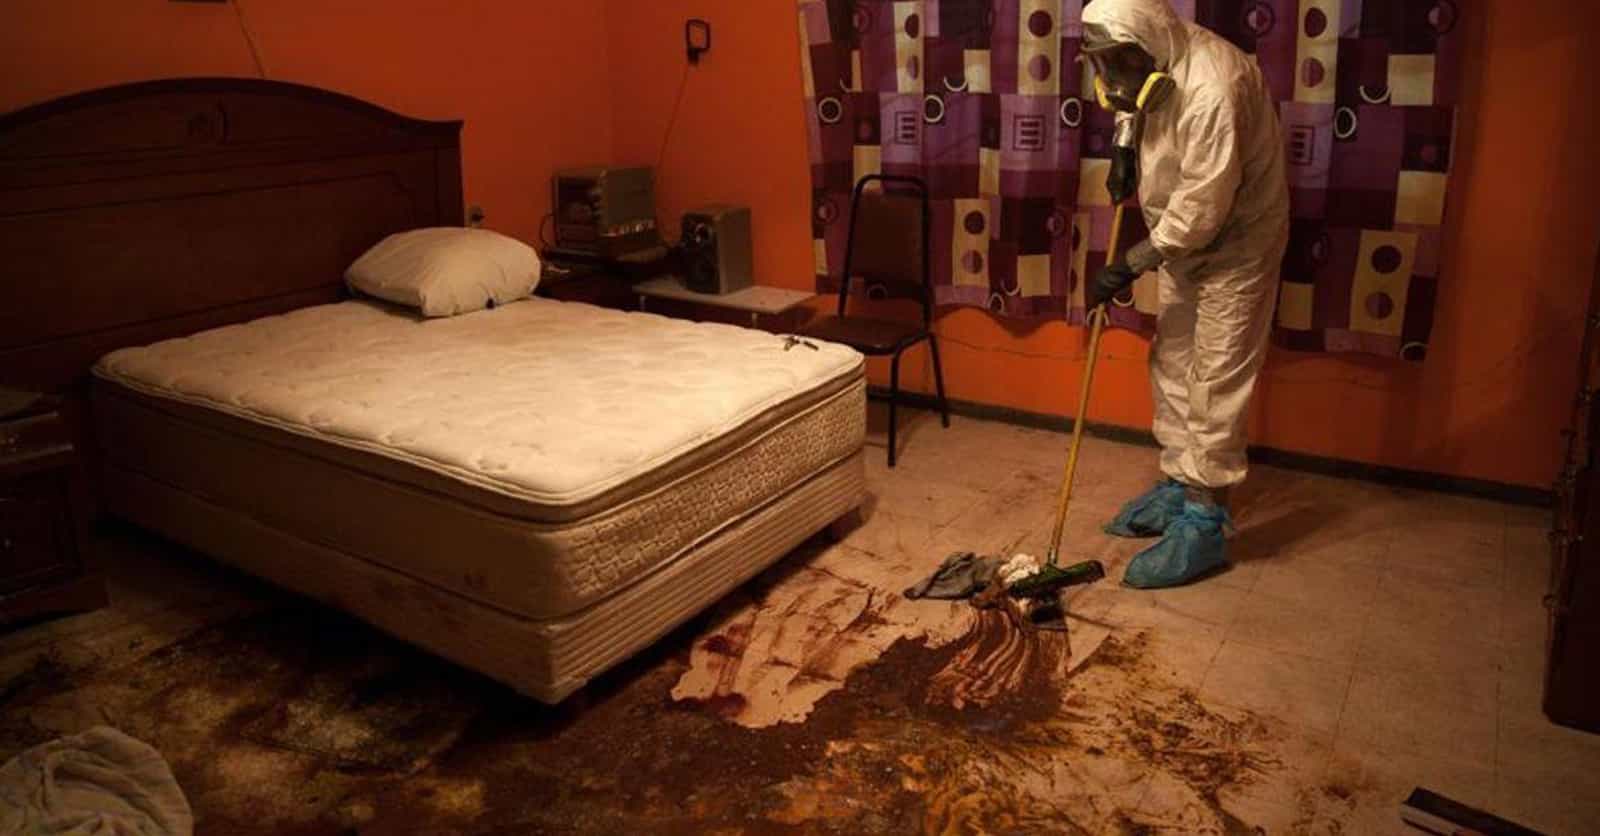 A Crime Scene Cleaner Answers All The Questions We've Always Been Curious About